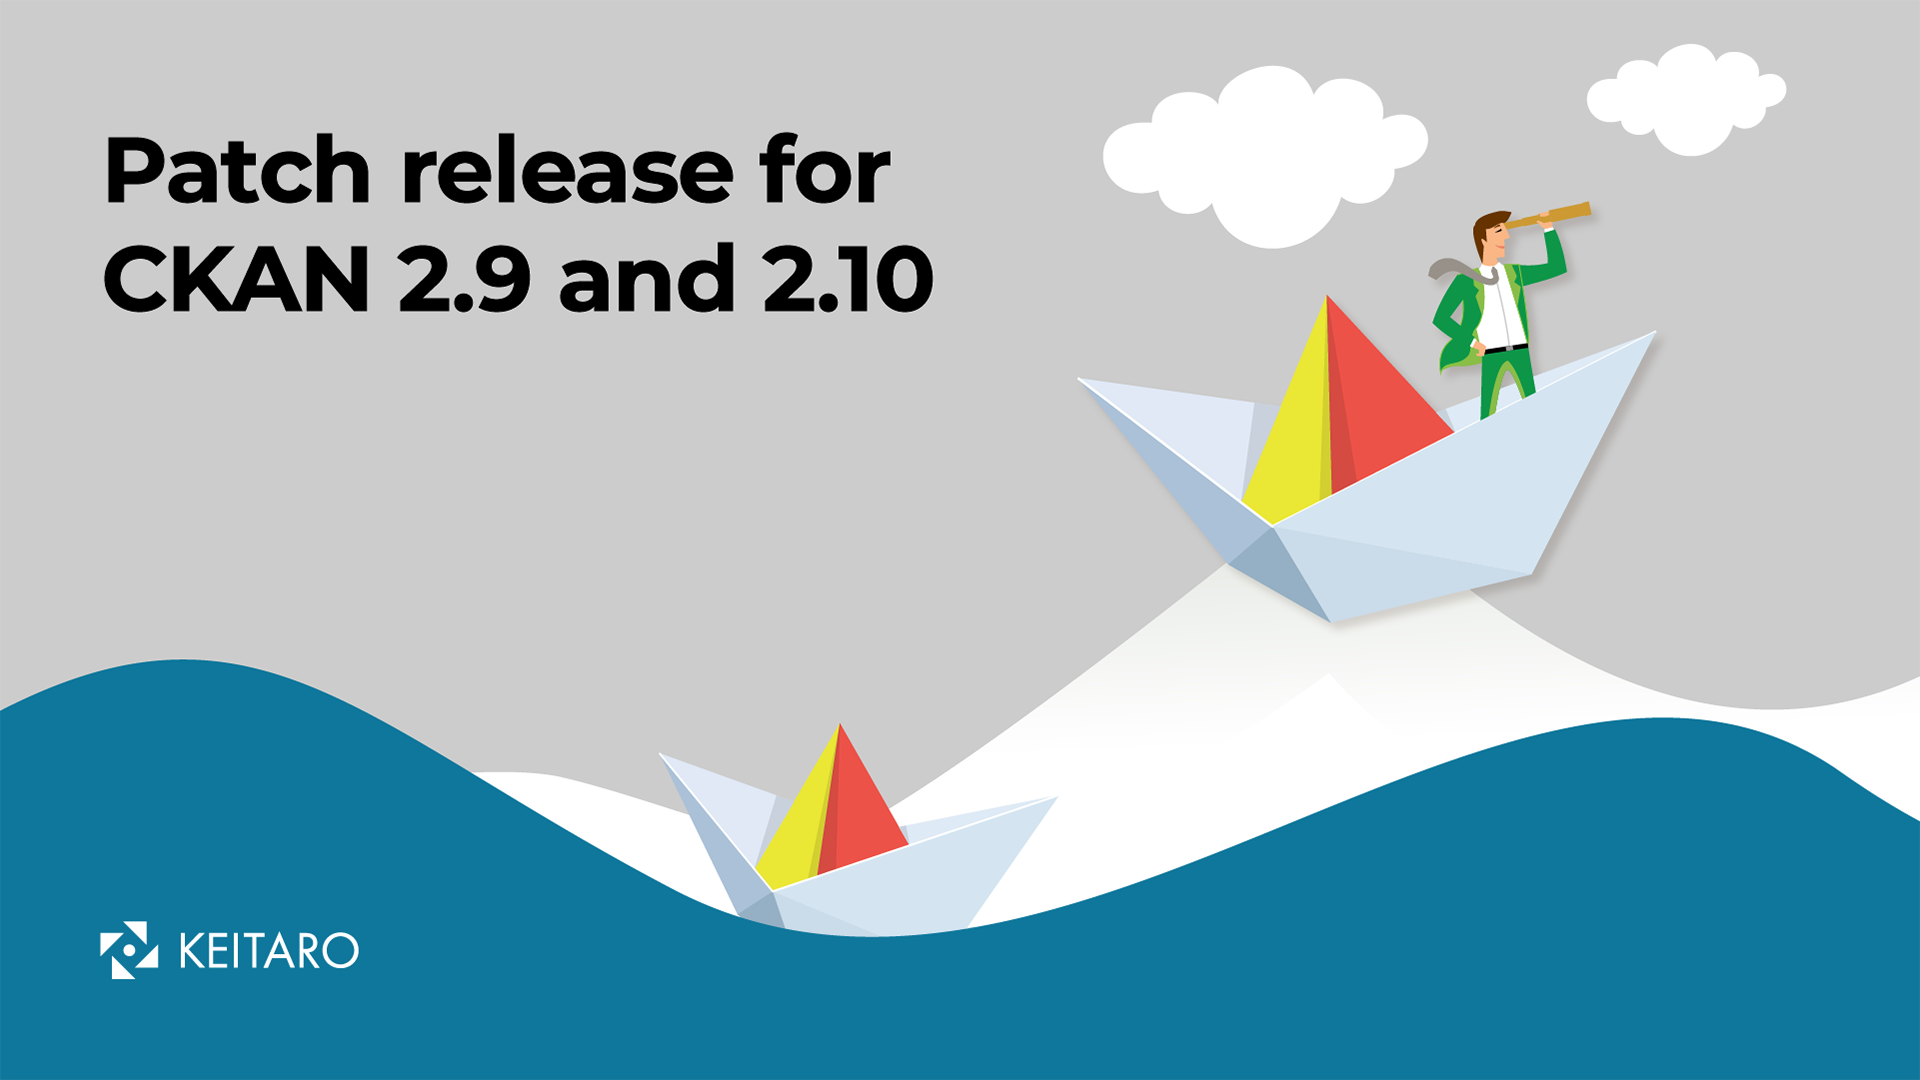 Patch release for CKAN 2.9 and 2.10